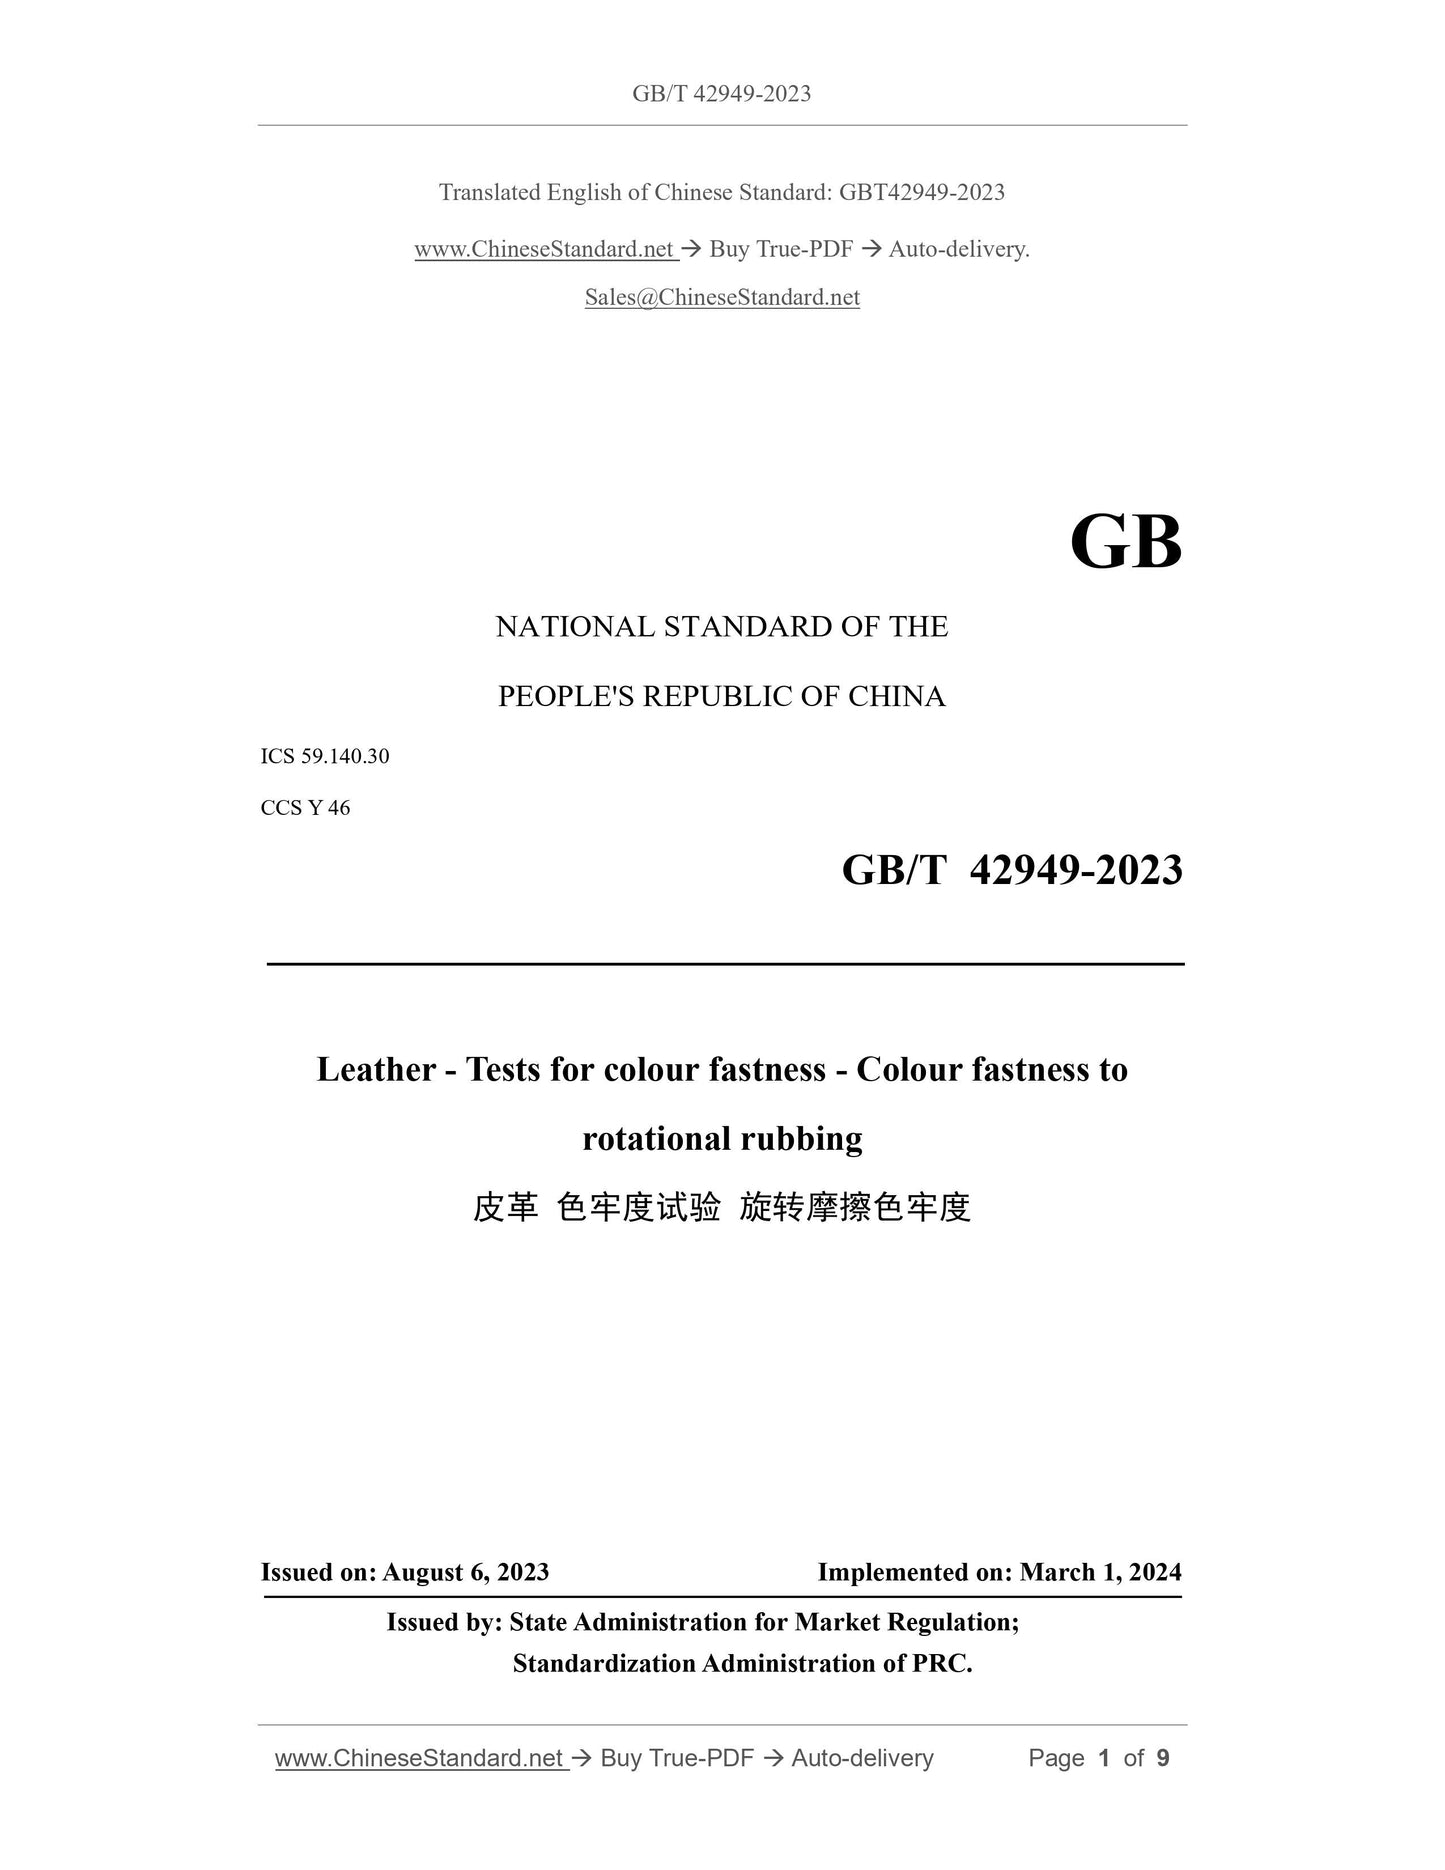 GB/T 42949-2023 Page 1